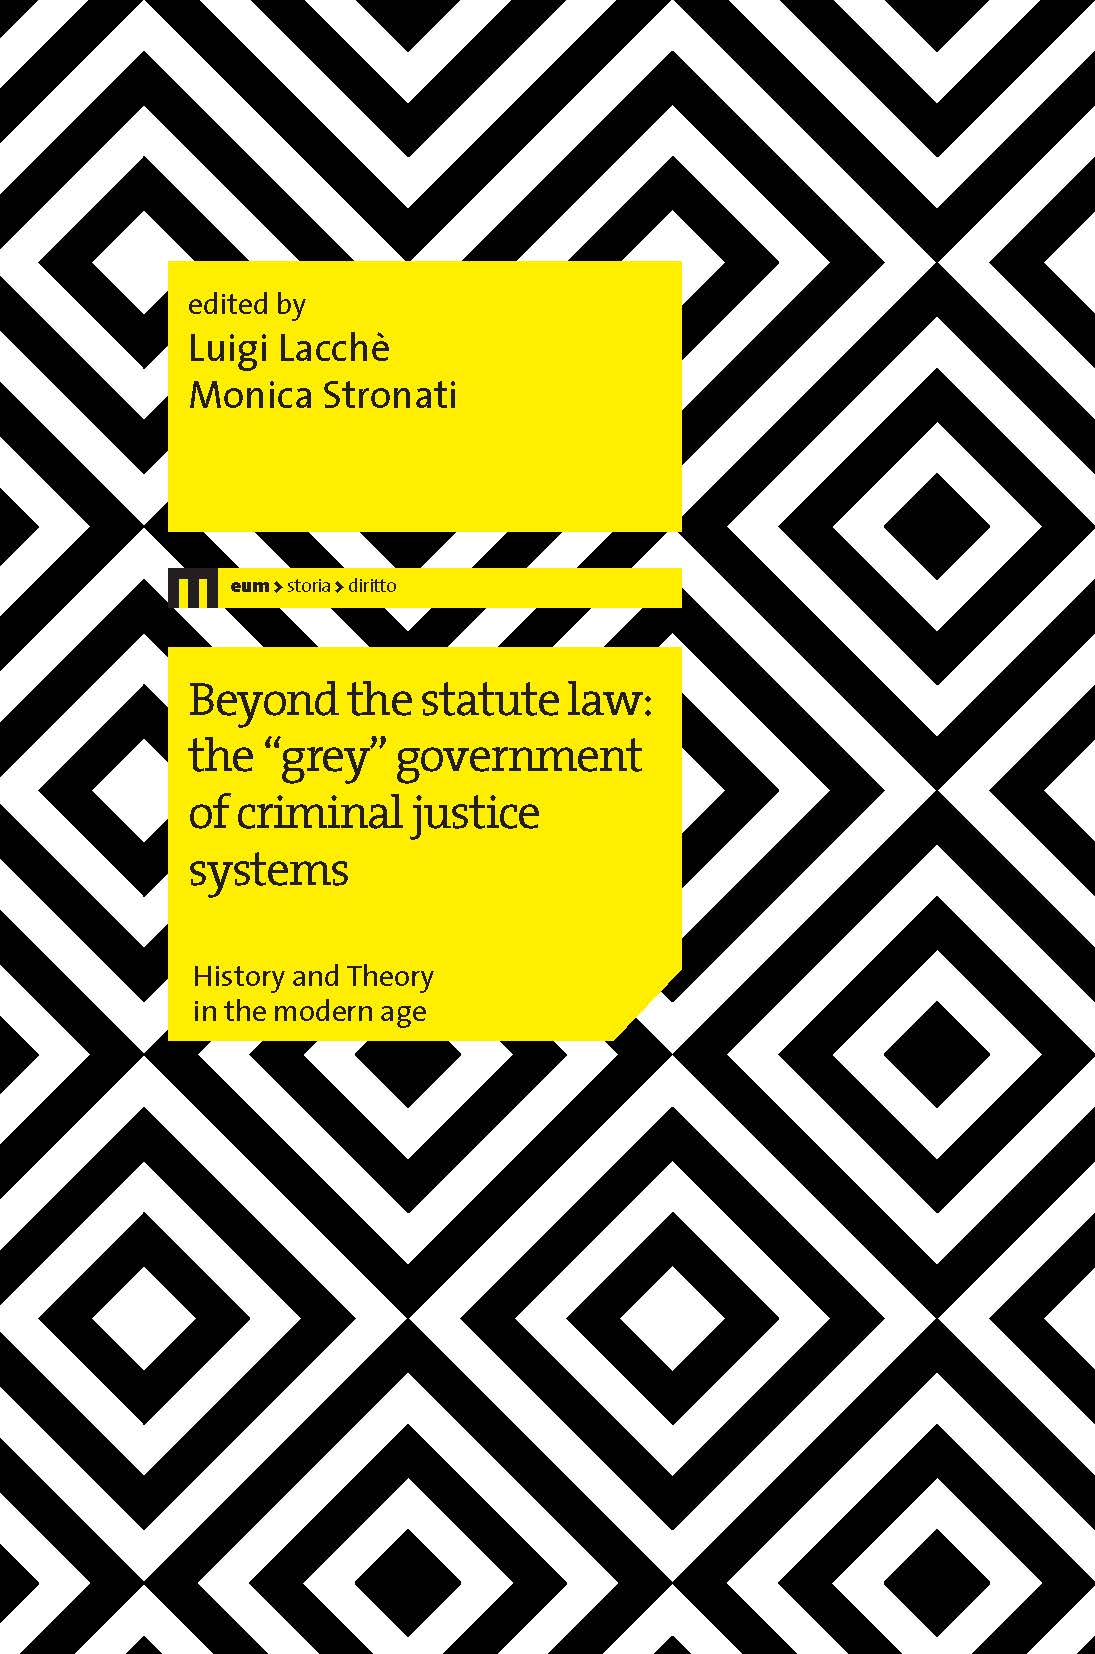 Beyond the statute law: the "grey" government of criminal justice systems